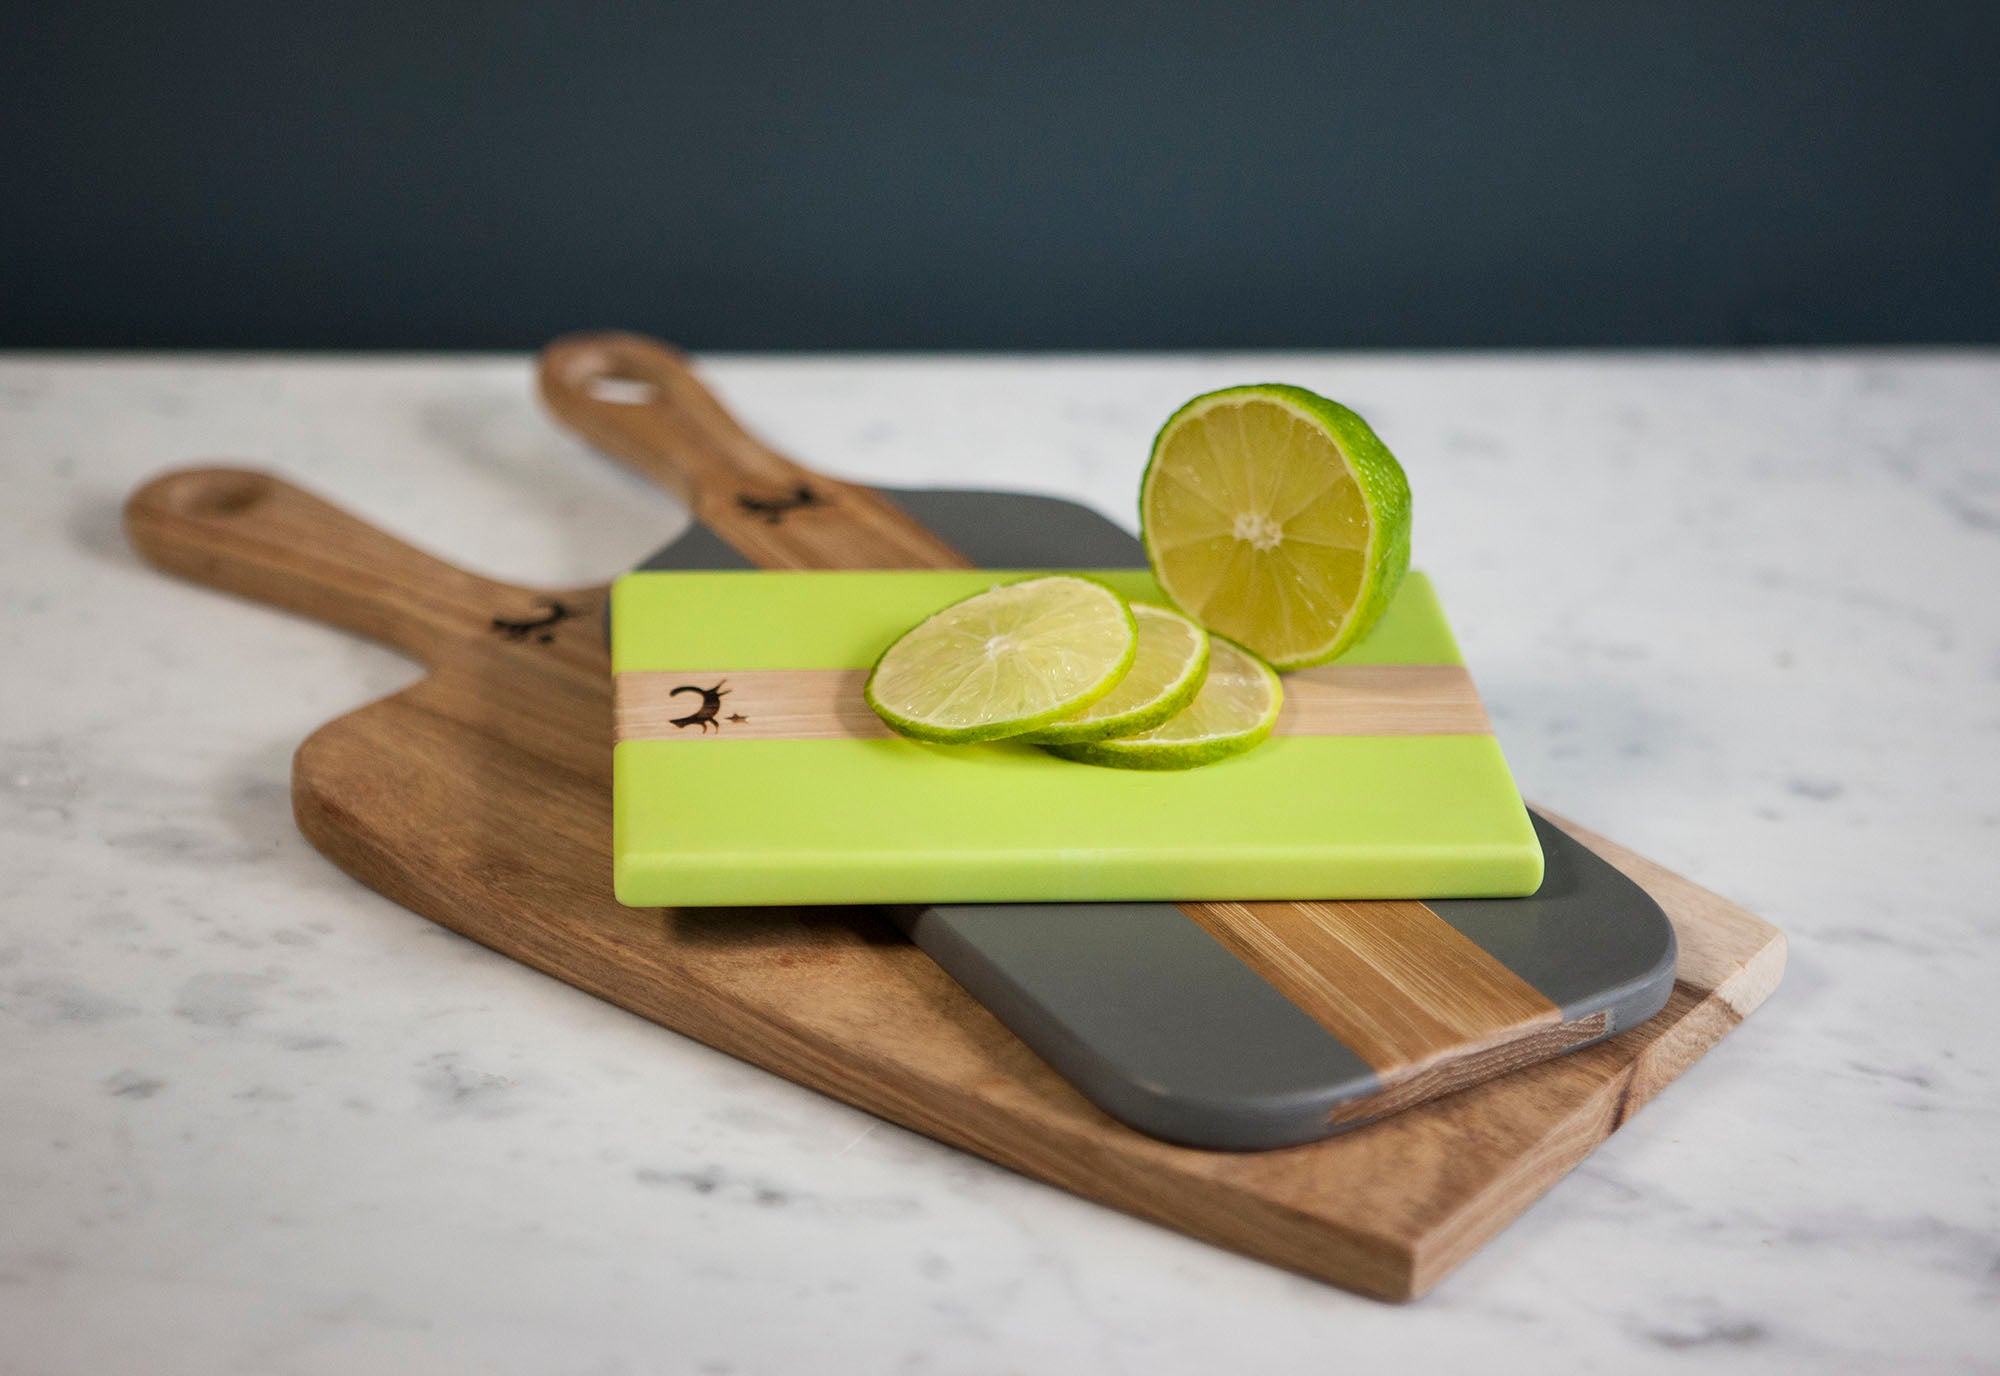 A selection of Coco Africa kitchenware wooden boards, all created from solid wood. Coco Africa wooden home décor products are available at Sarza home goods and furniture store in Rye New York